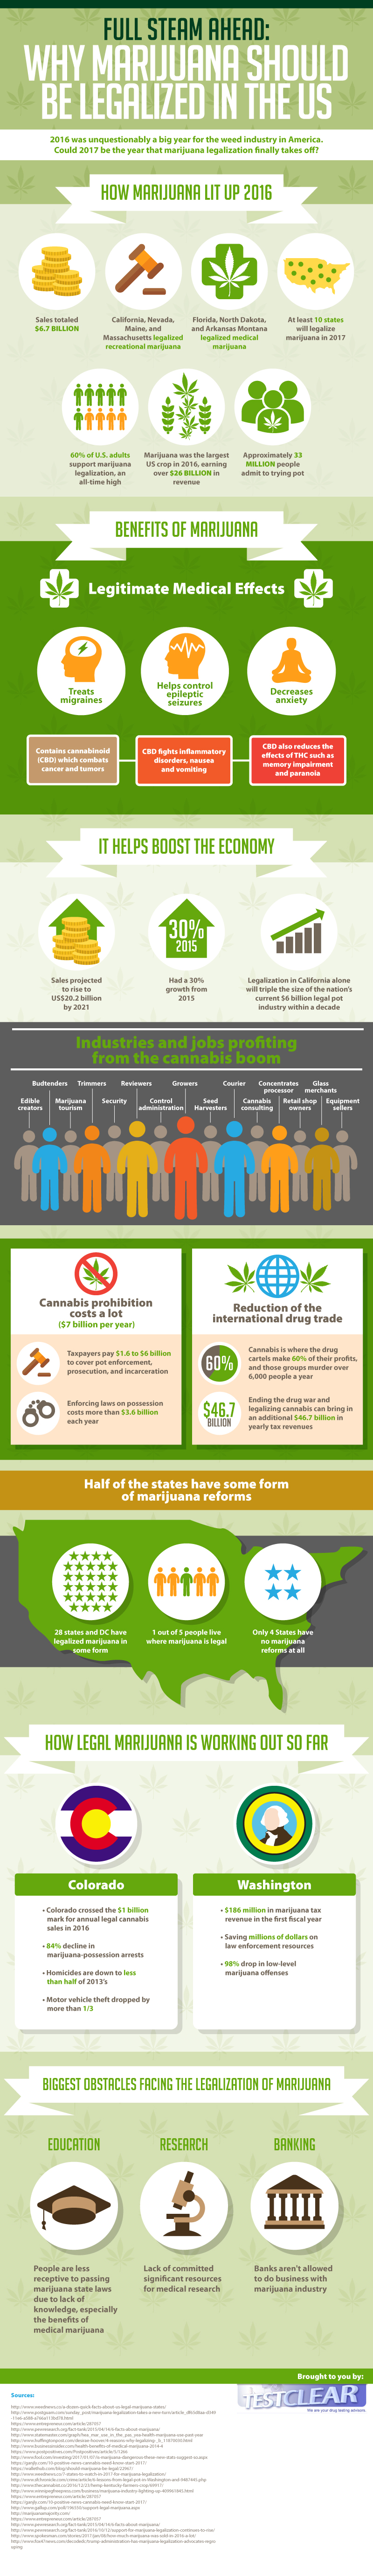 Marijuana Should Not Be Illegal In The US - Infographic